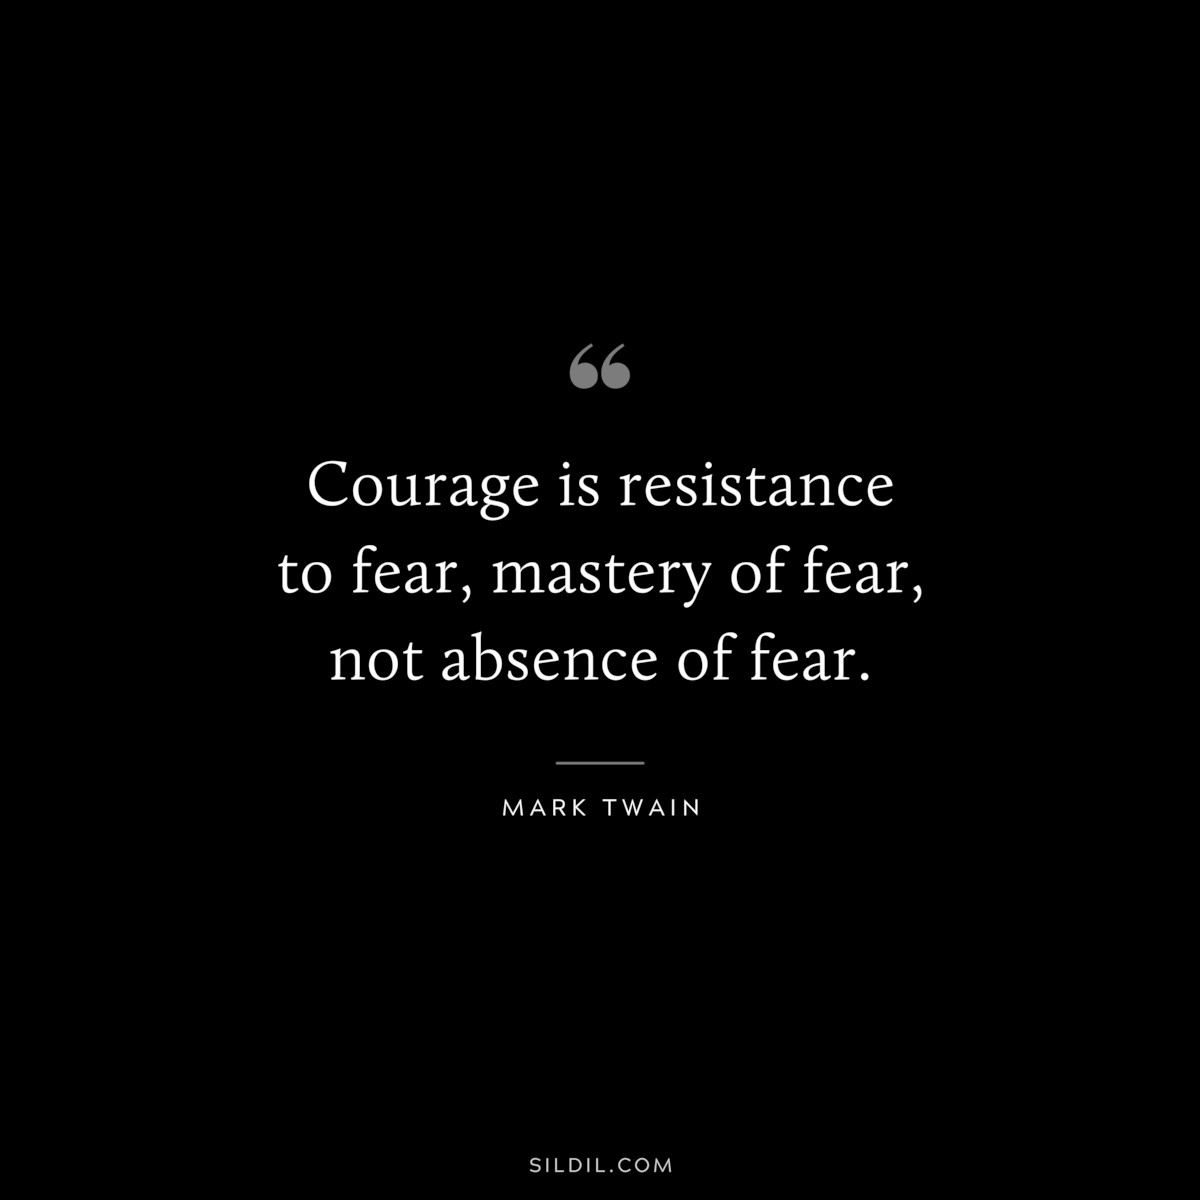 Courage is resistance to fear, mastery of fear, not absence of fear. ― Mark Twain